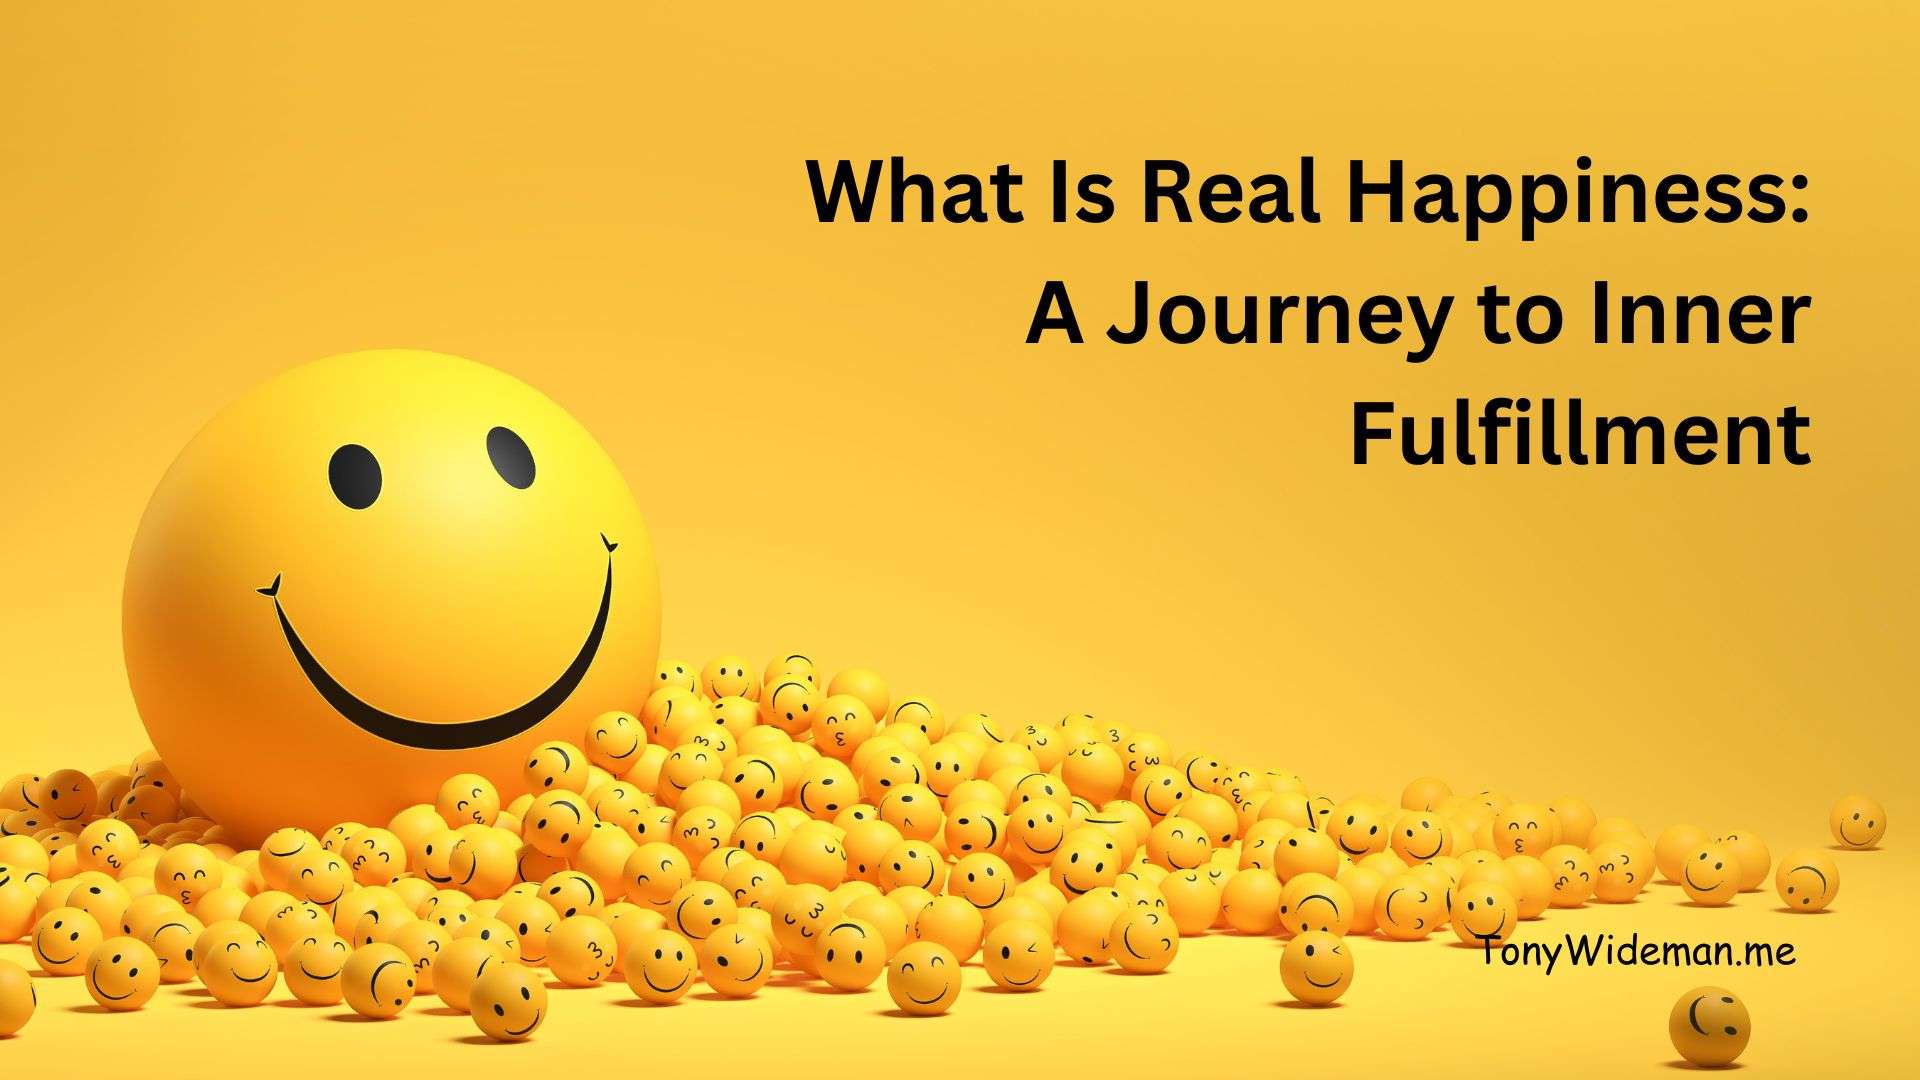 What Is Real Happiness: A Journey to Inner Fulfillment